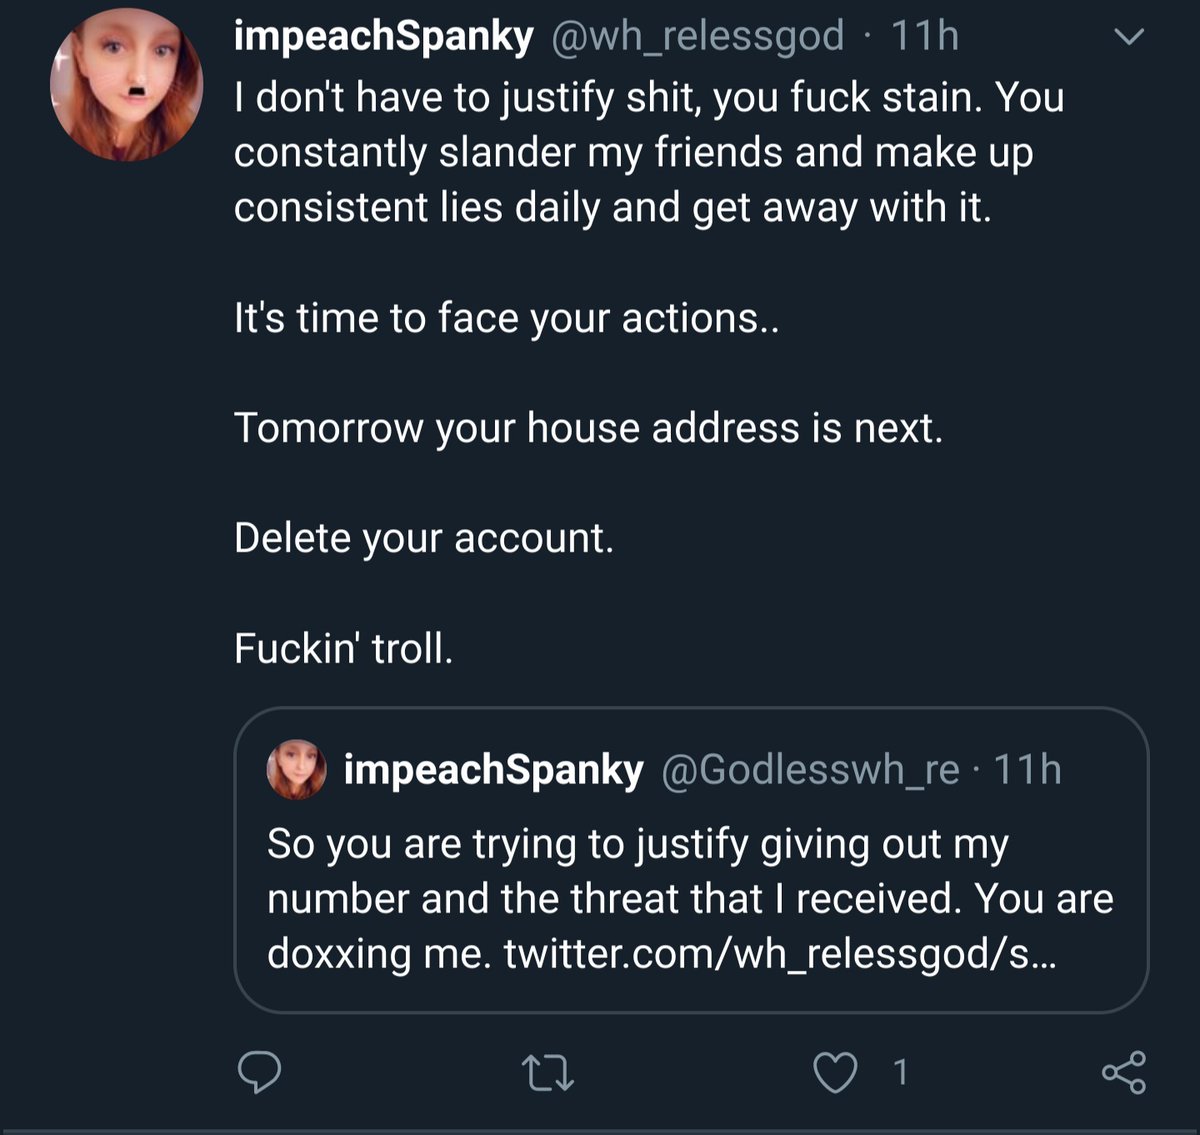 And again threatening to release her address unless she deletes her account: https://twitter.com/wh_relessgod/status/1302220822648631298?s=19 https://archive.is/muHnm 